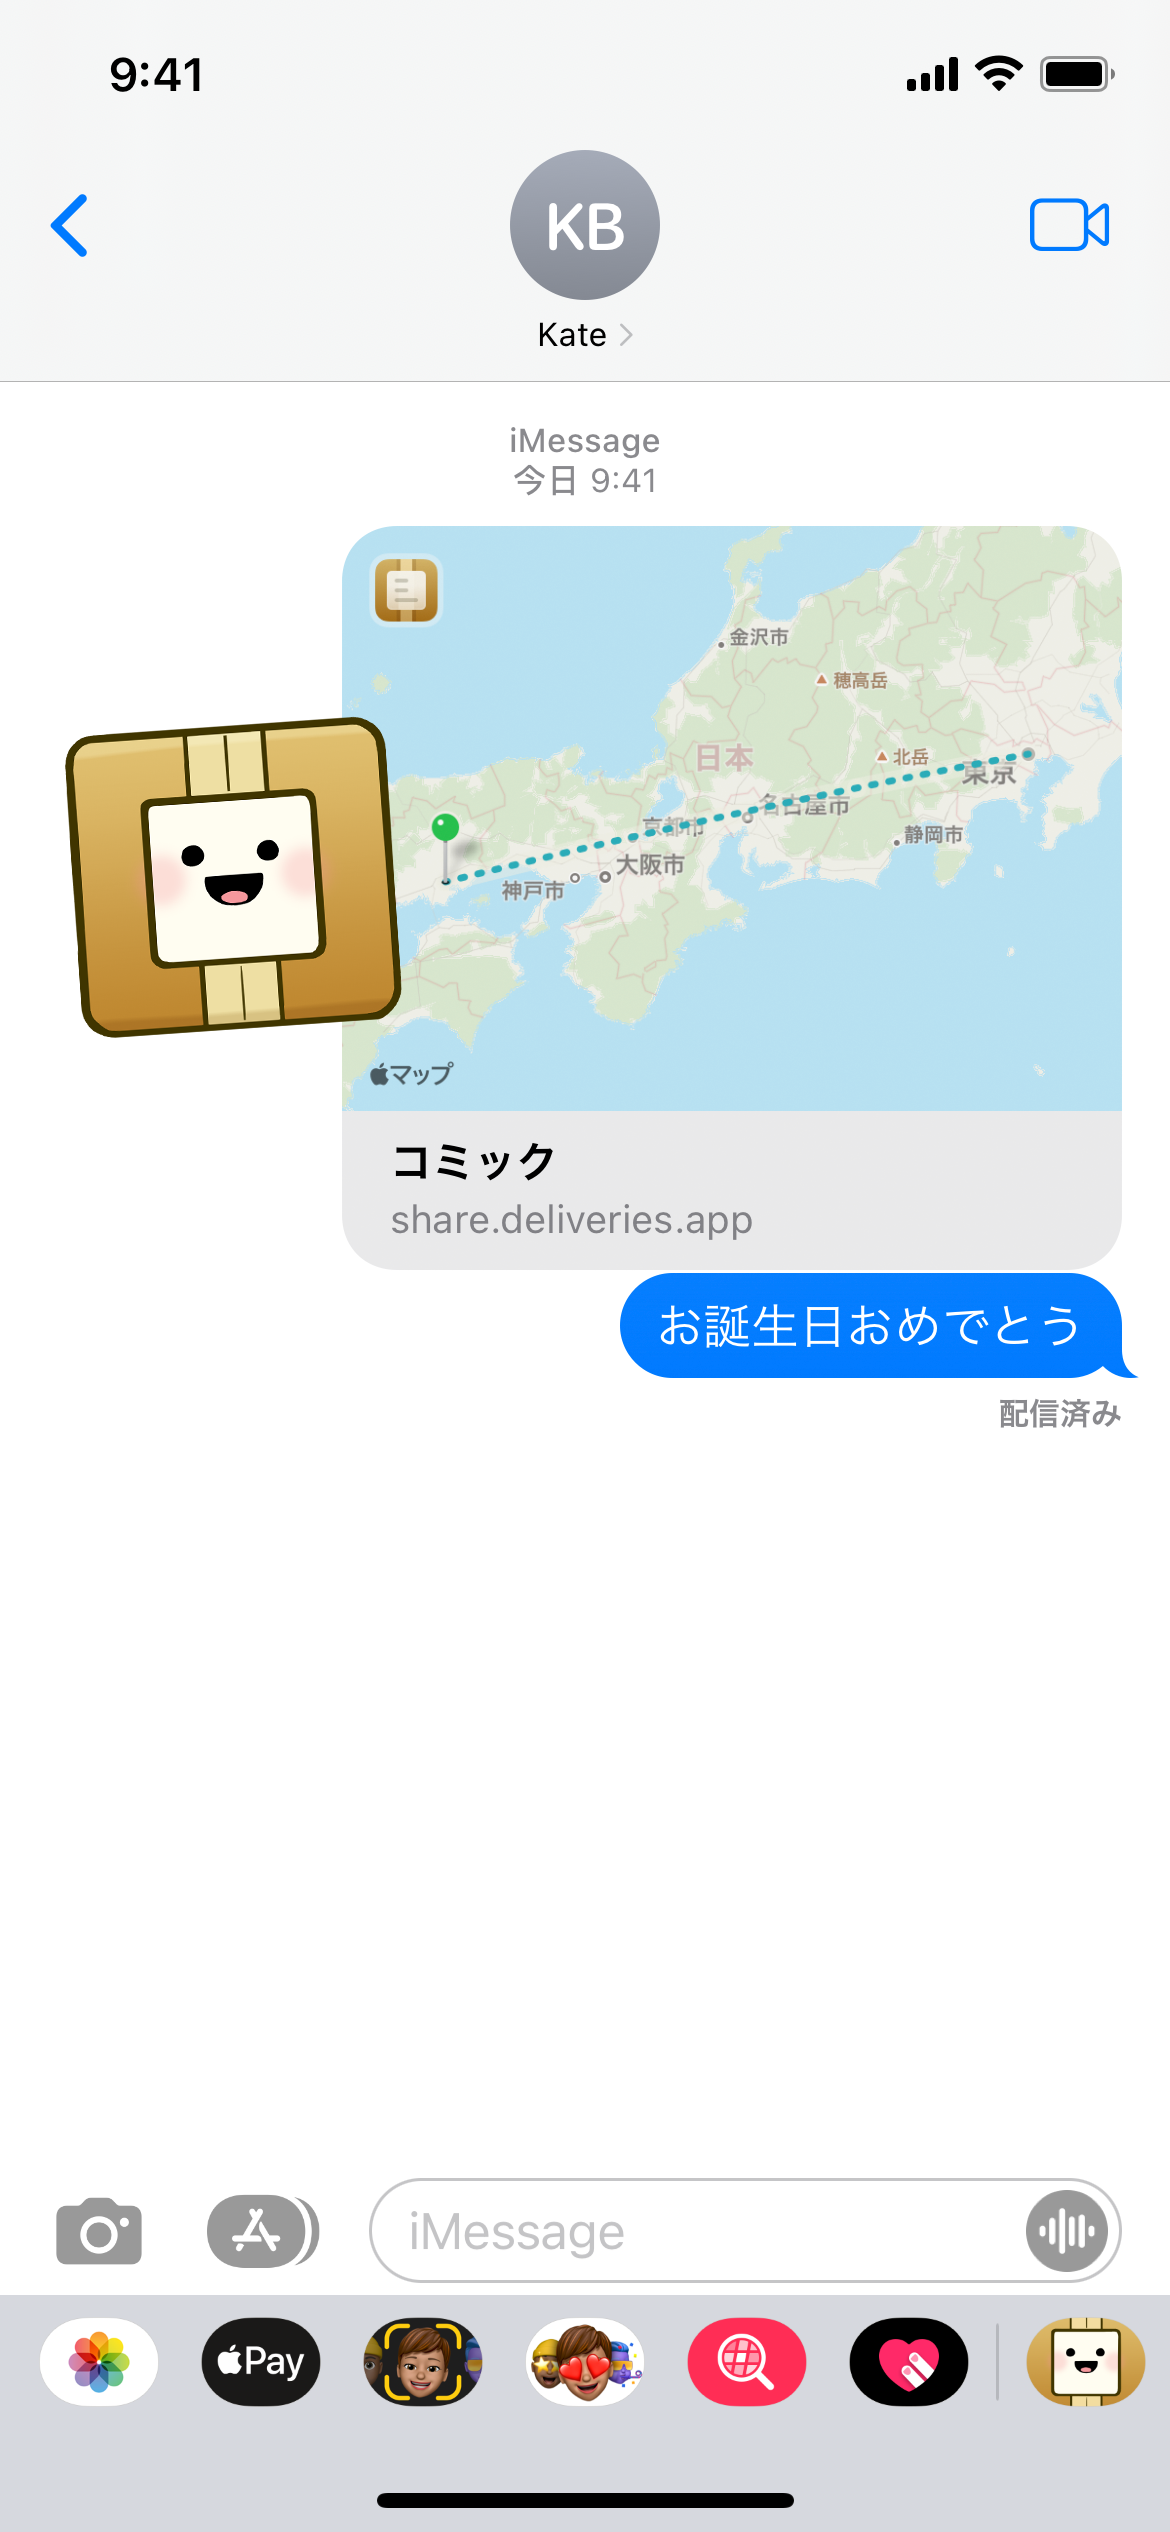 Deliveries iMessage Stickers for iPhone screenshot